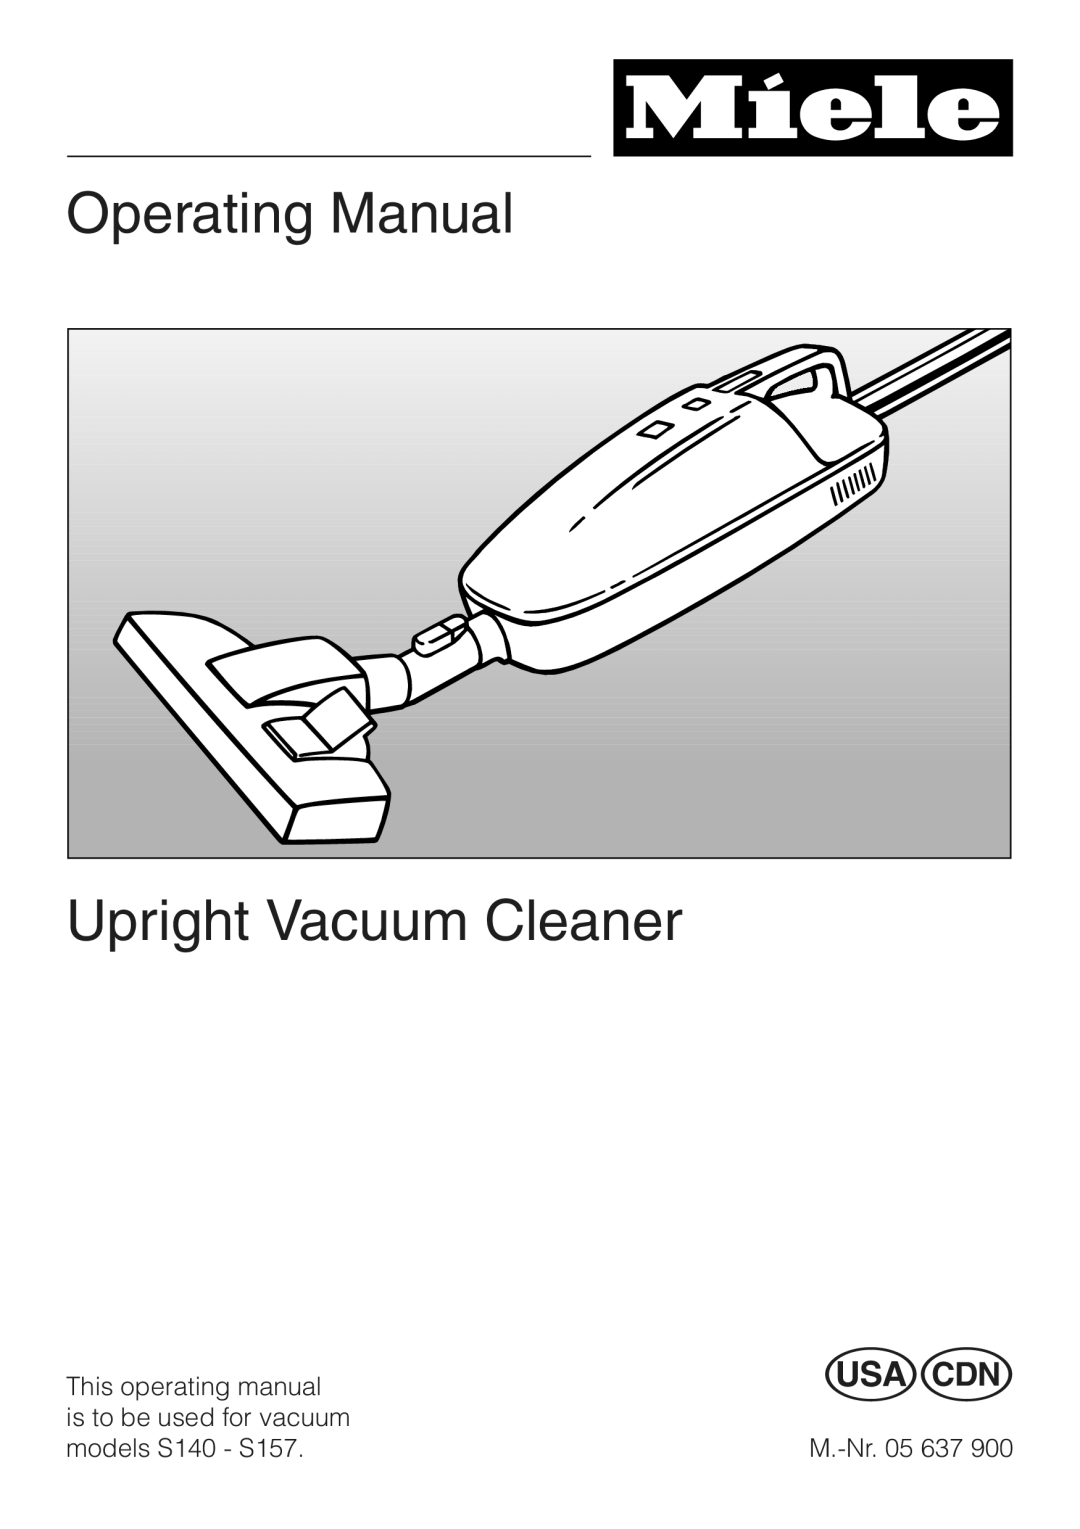 Miele S157 manual Operating Manual Upright Vacuum Cleaner 